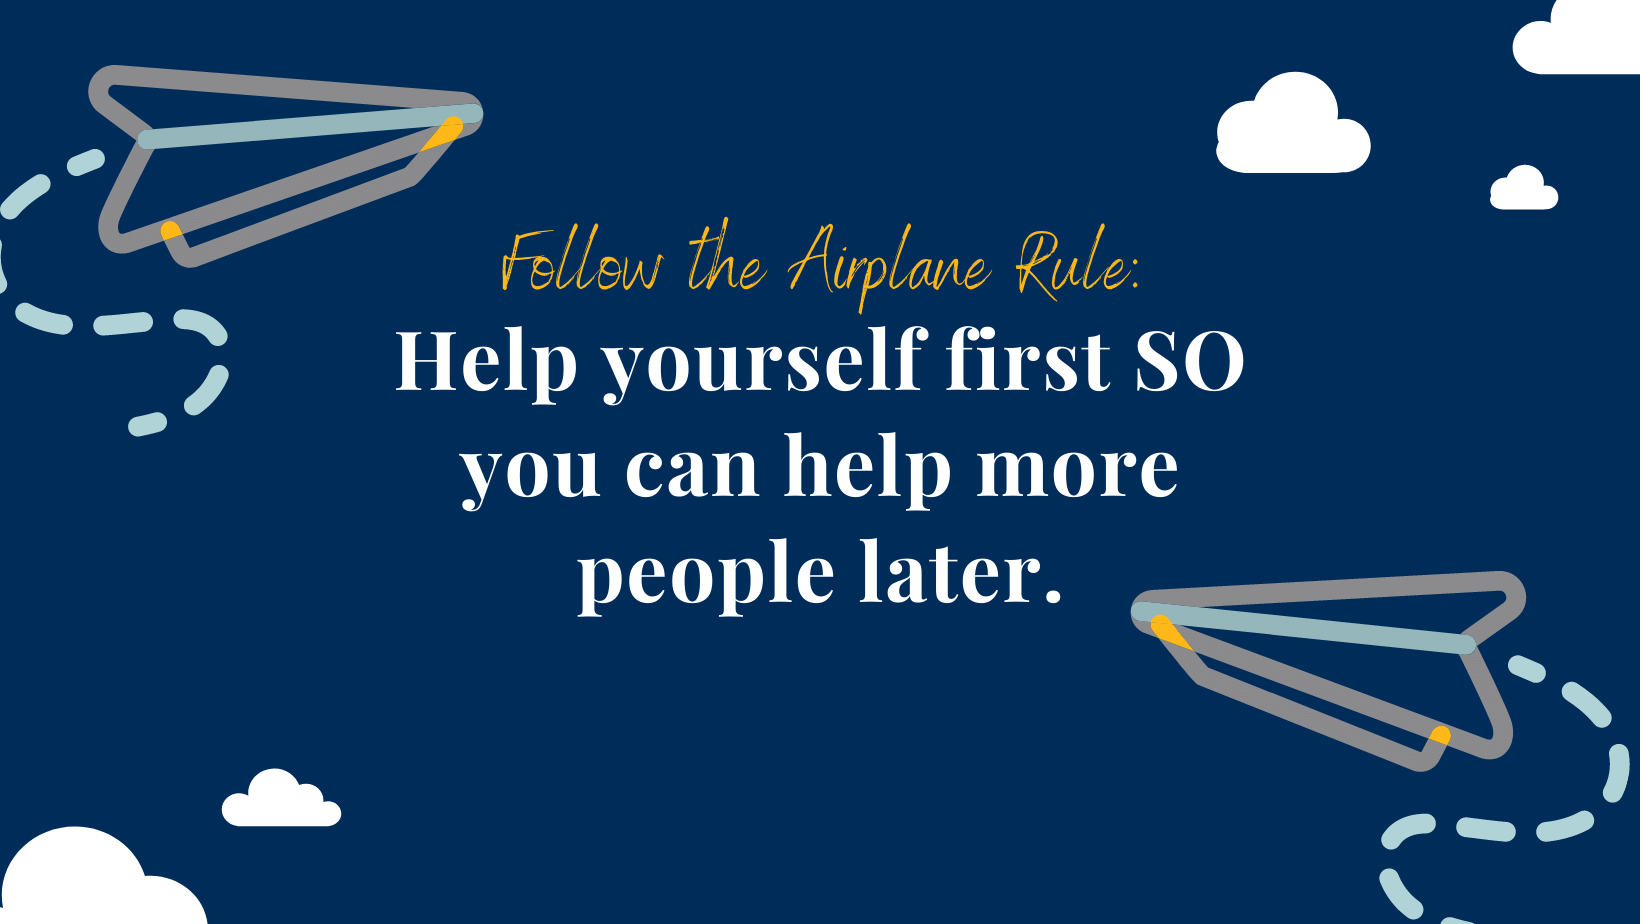 Photo Text Use the Airplane Rule. Help yourself first SO you can help more people later.